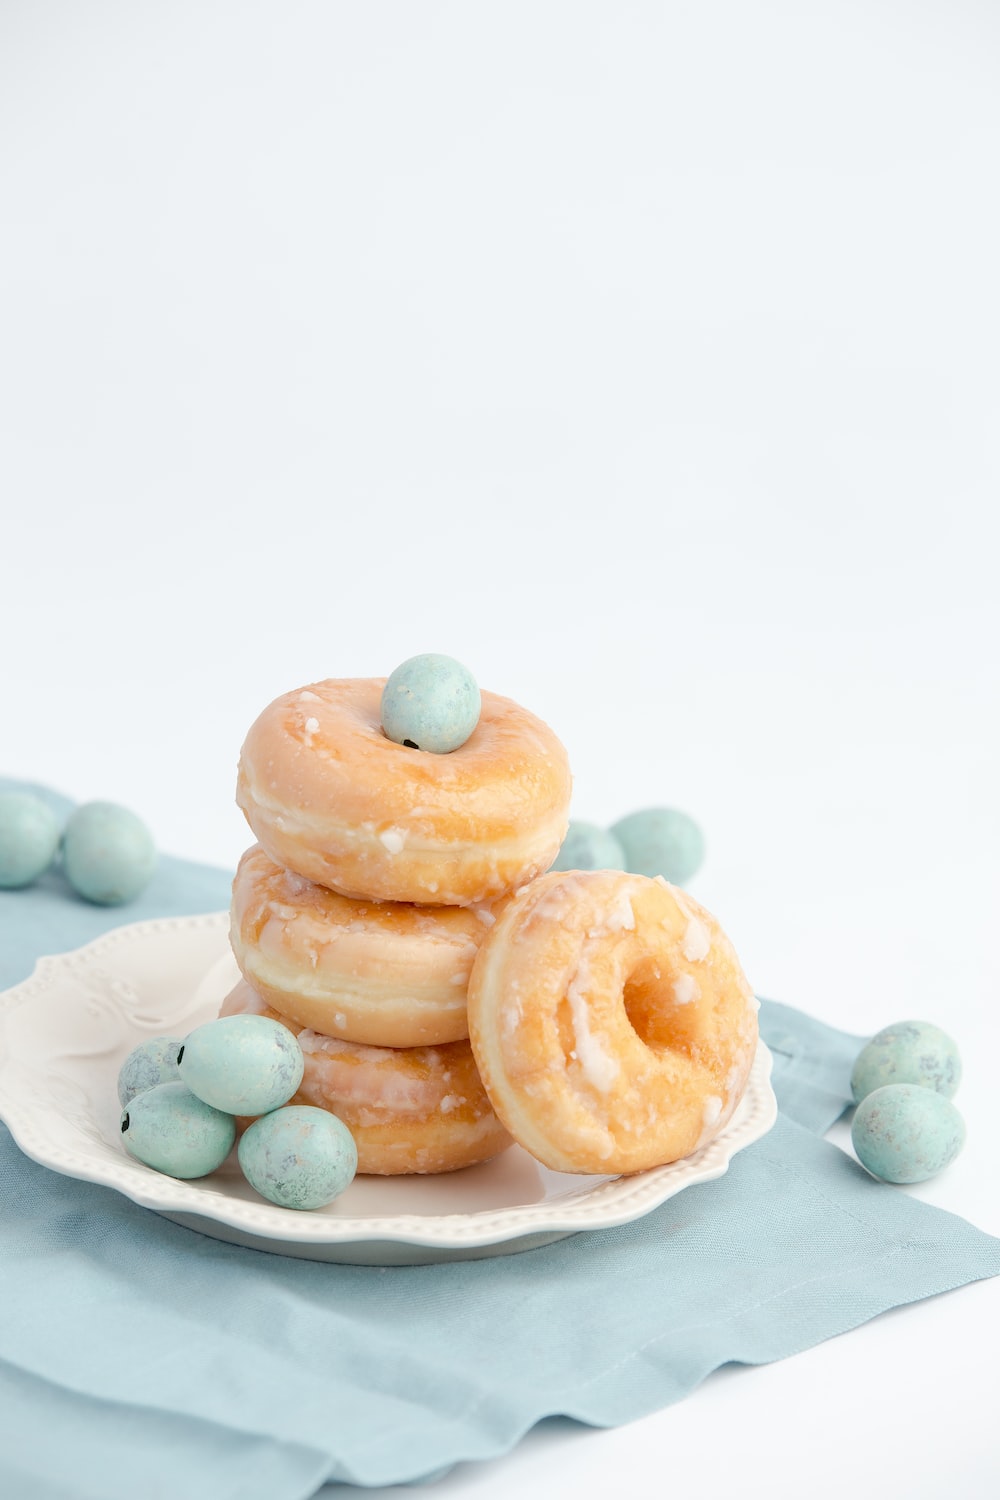 Pastel Food Picture. Download Free Image